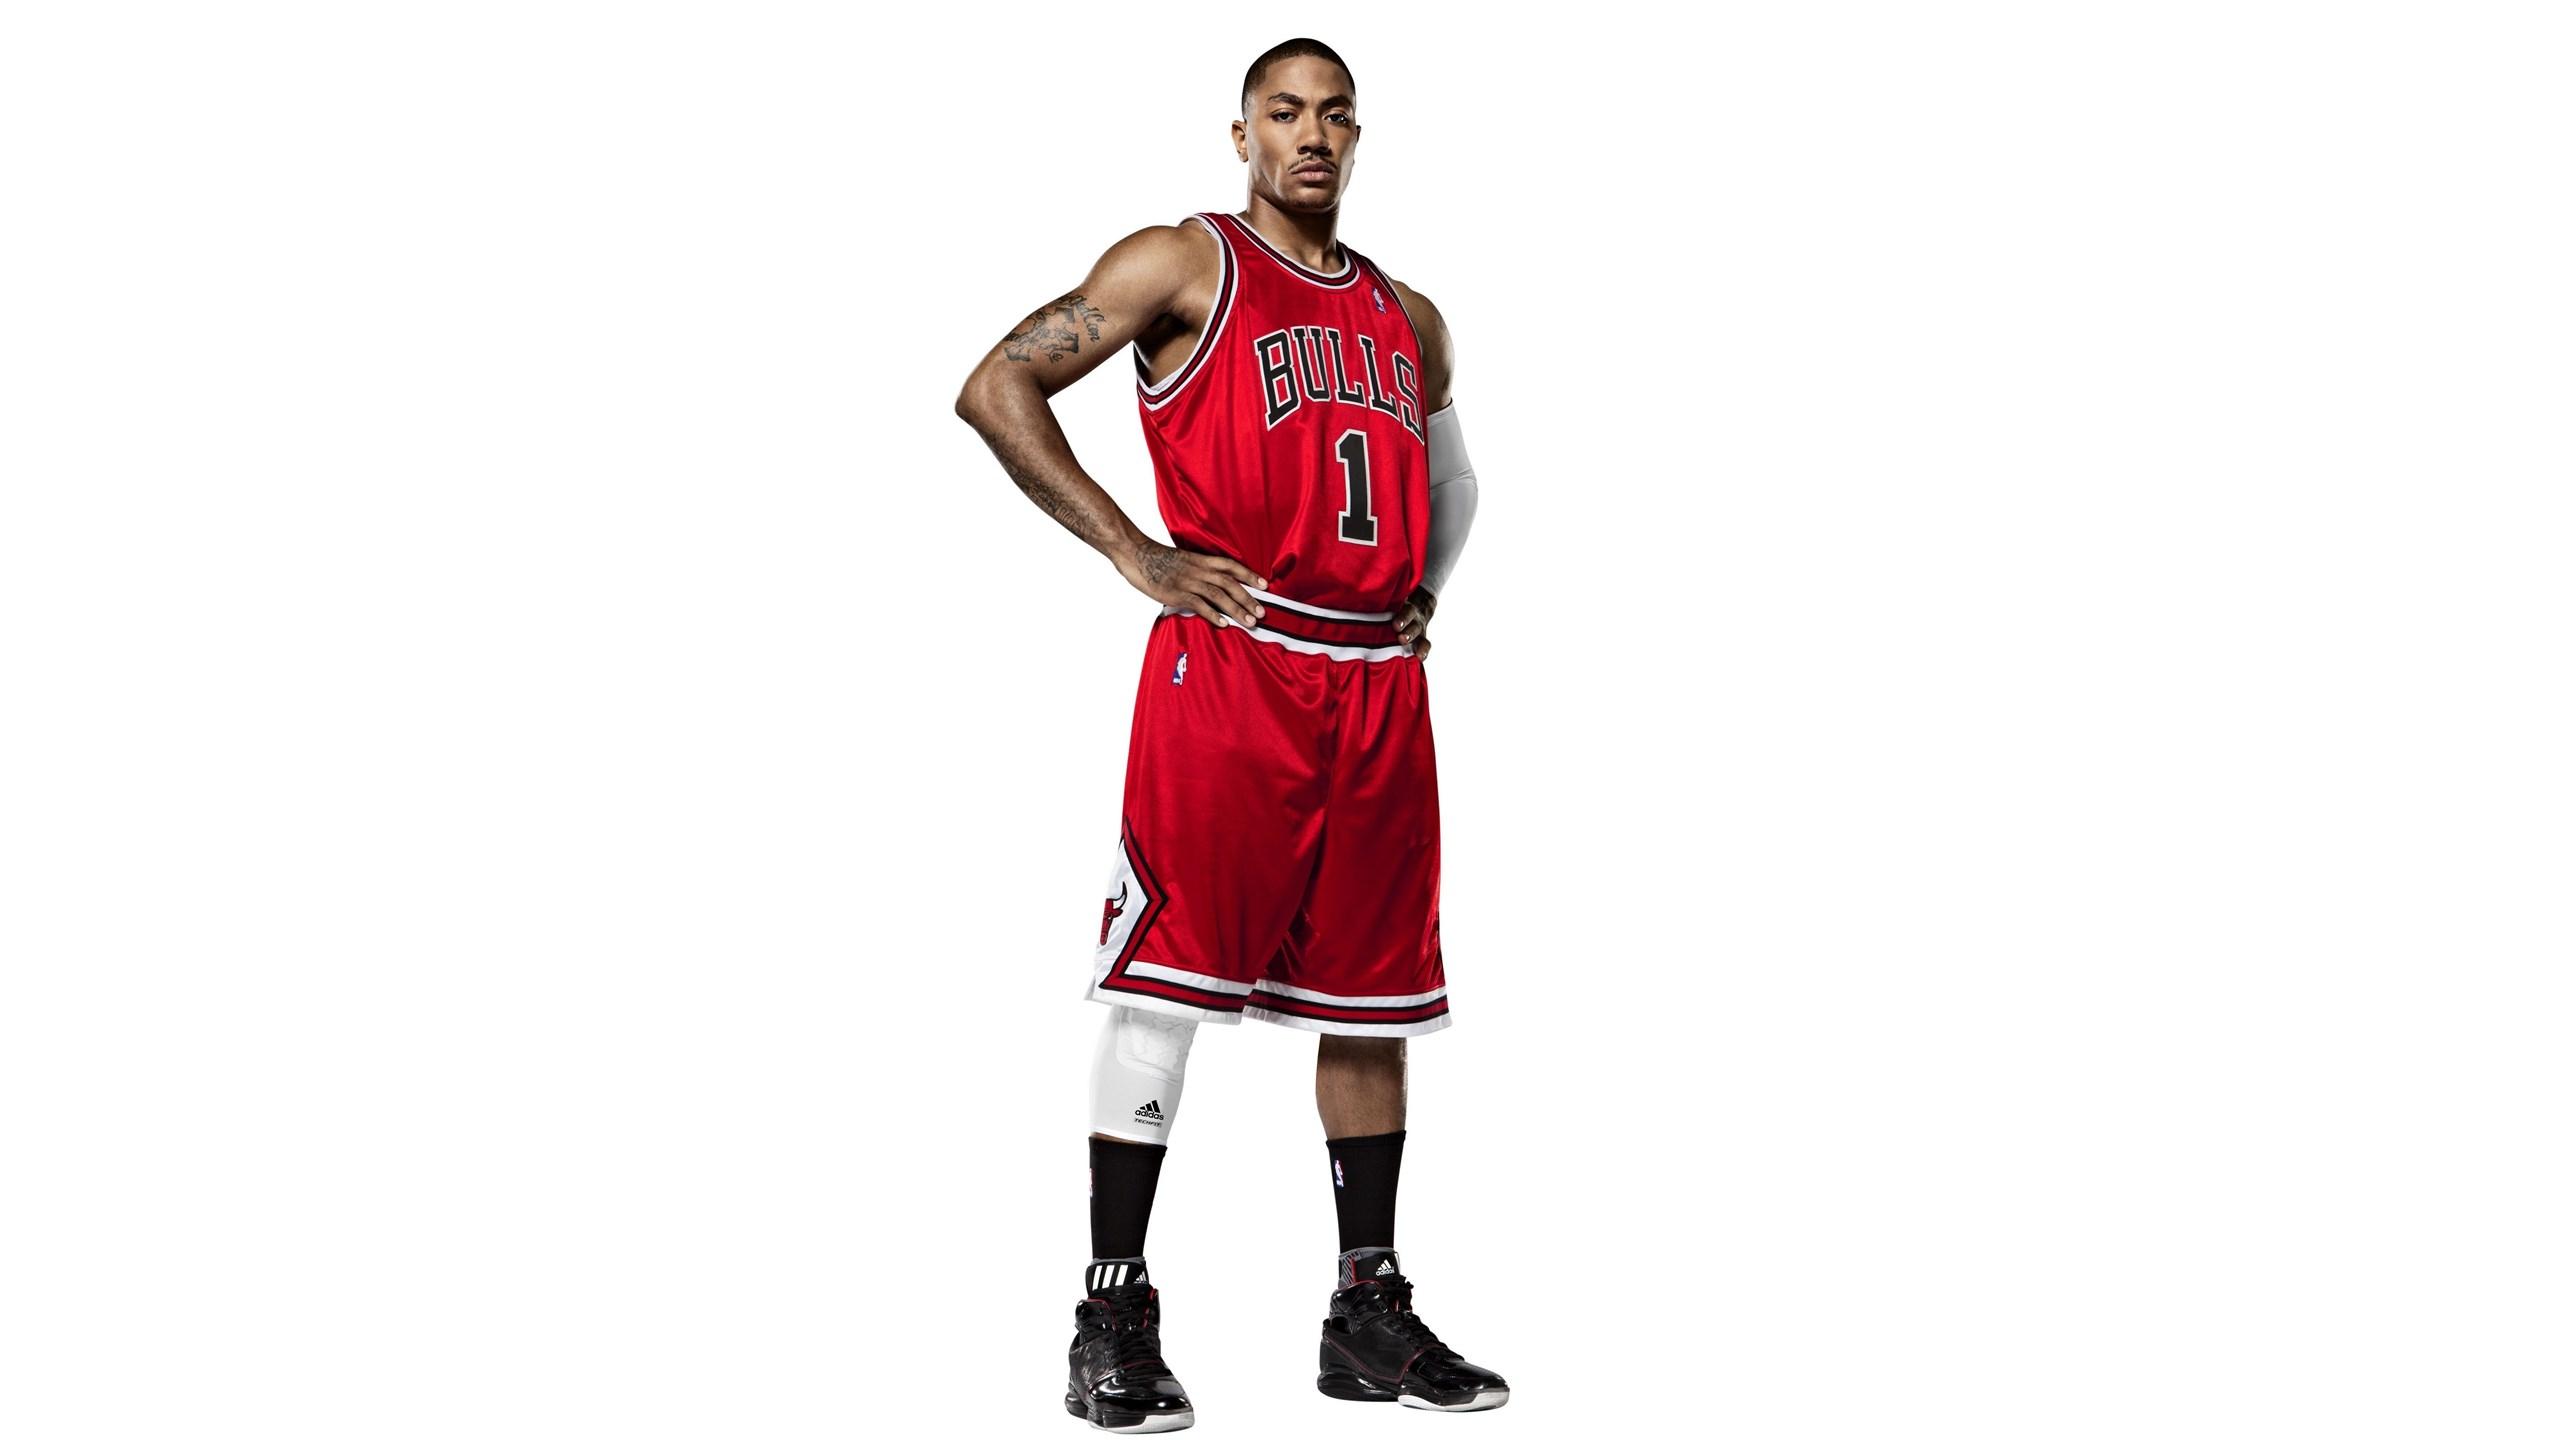 Chicago Bulls Players Wallpapers - Top Free Chicago Bulls Players ...